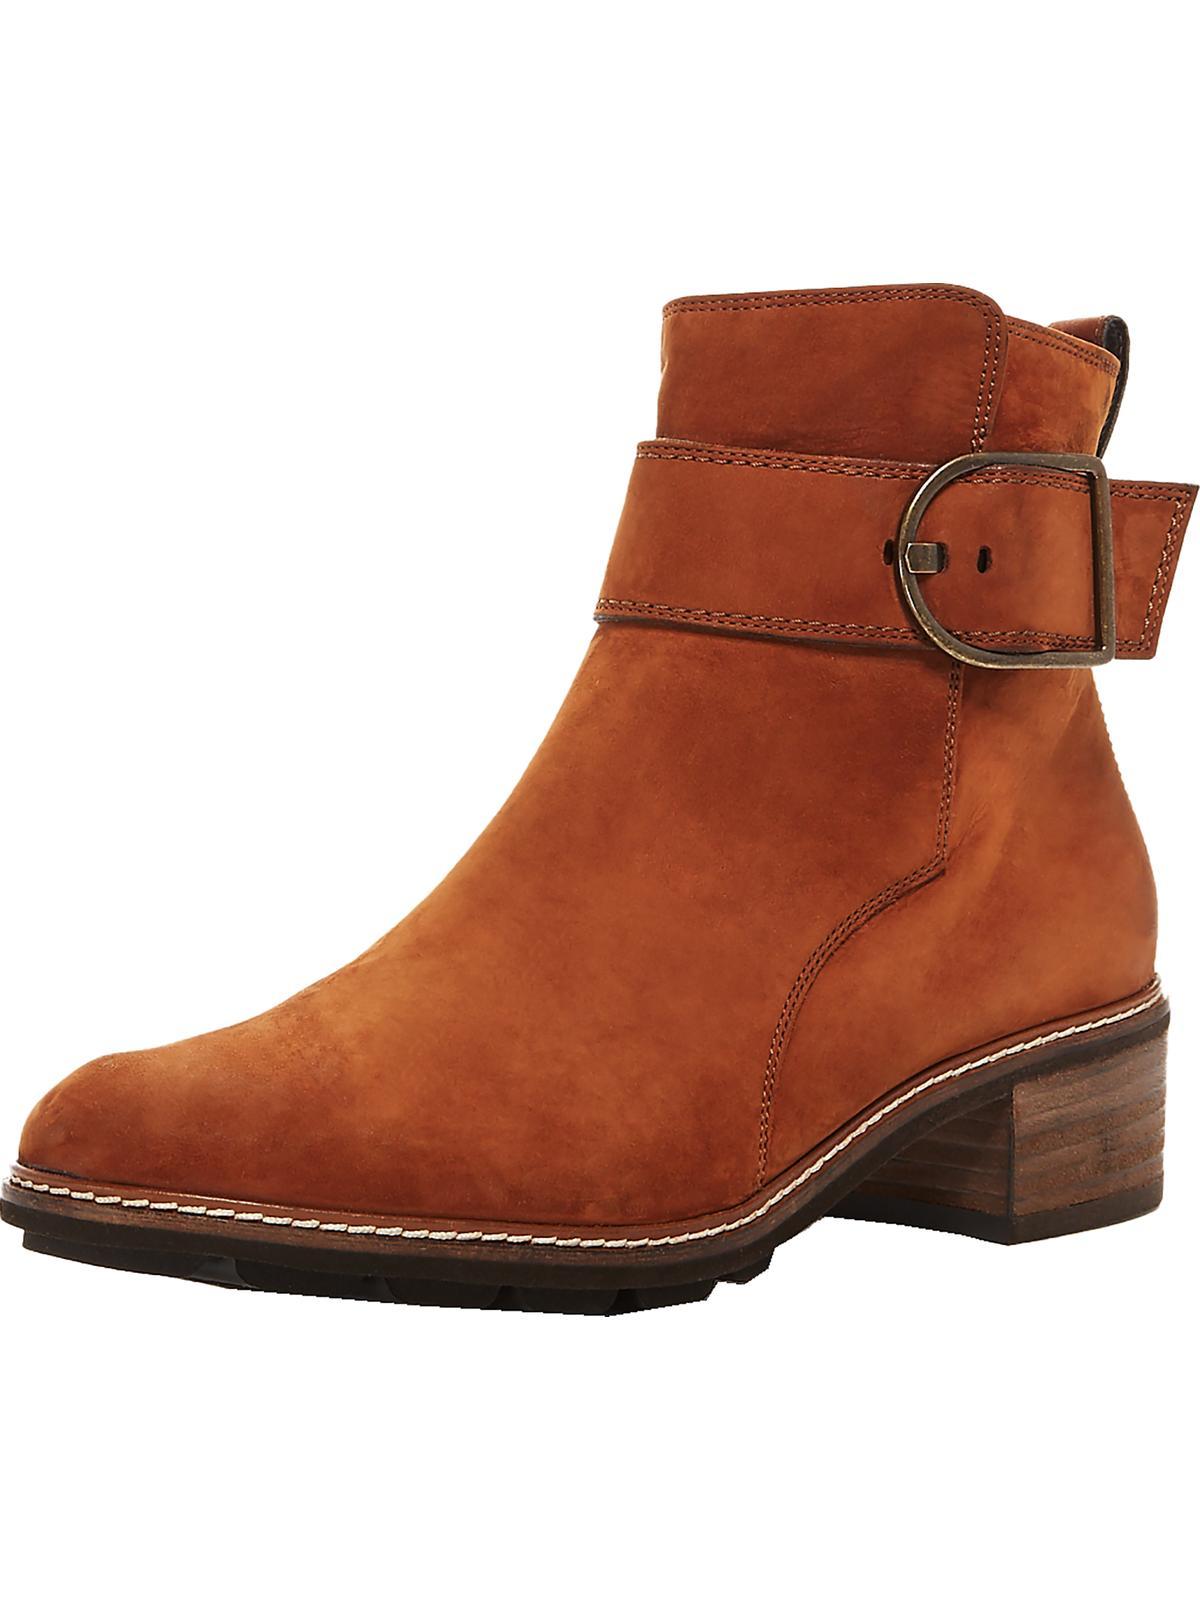 Paul Green Cimarron Suede Stacked Ankle Boots in Brown | Lyst